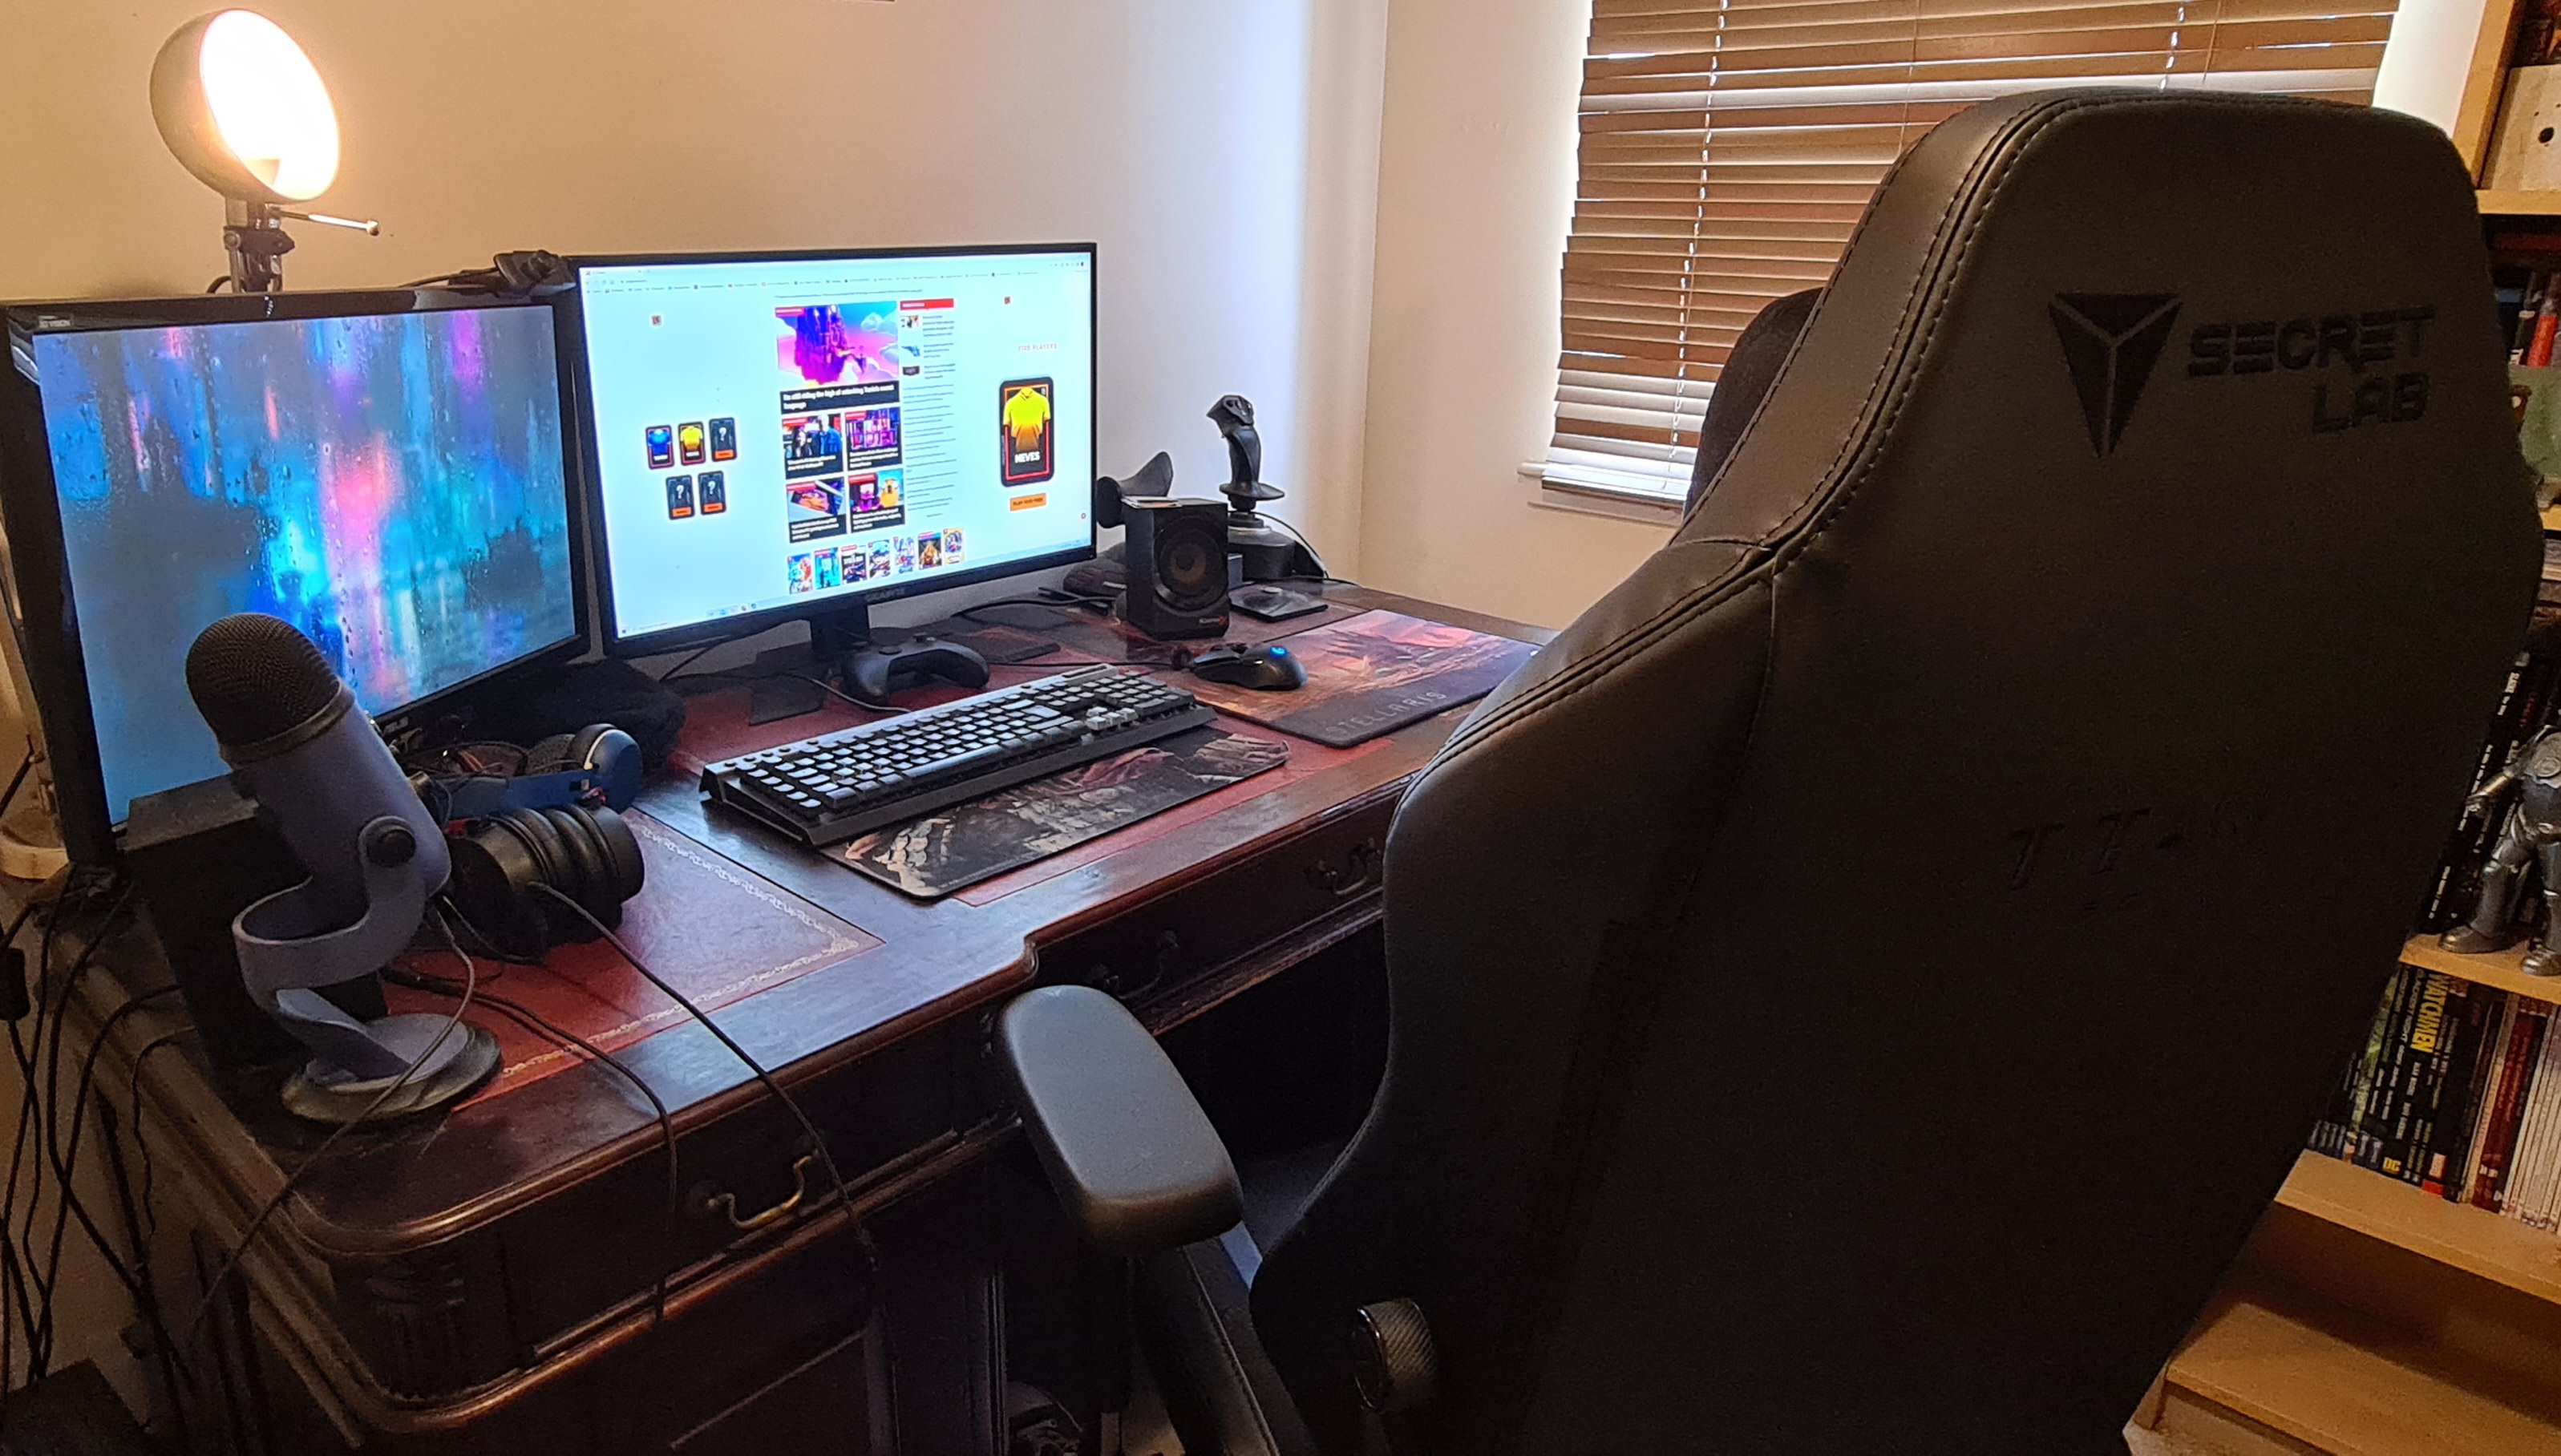 A chair and desk